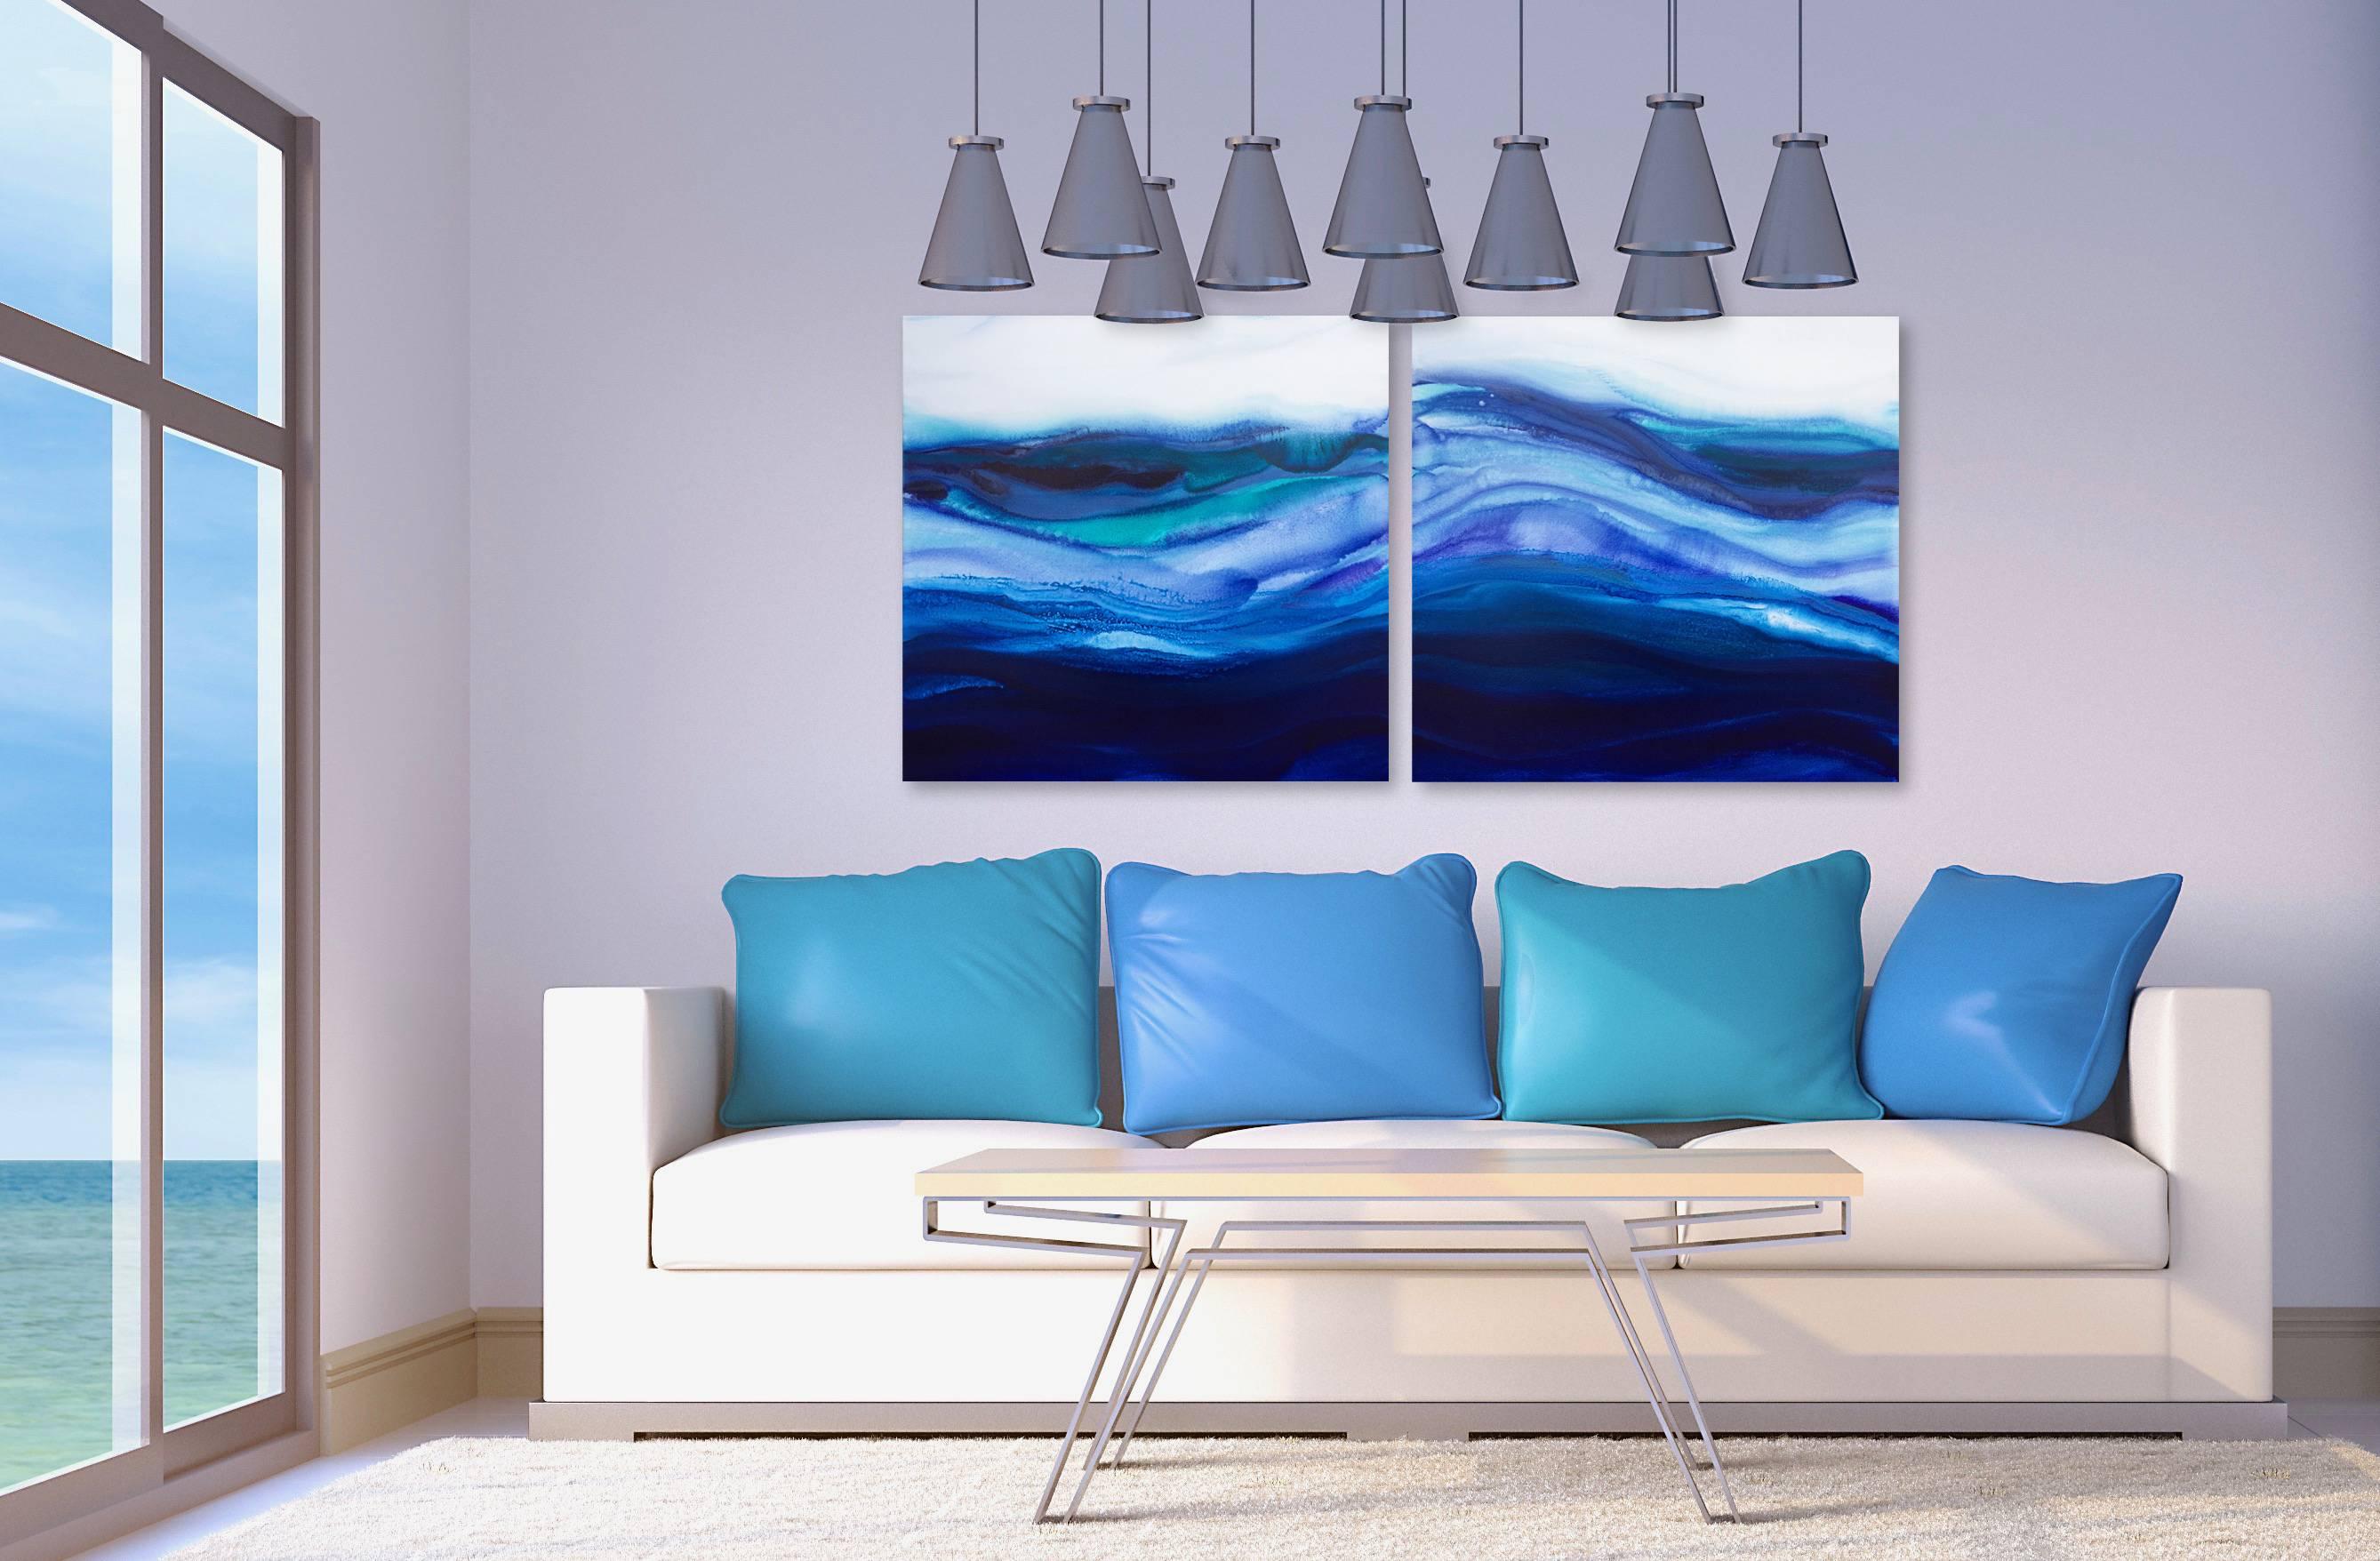 water, wave, sea, ocean, sky, droplets, statement, movement, blue and white, drip, influenced by: Pat Steir, diptych

ABOUT TEODORA GUERERRA

BIOGRAPHY
Teodora Guererra received her Bachelor of Arts in Art Education with a minor in Studio Art from